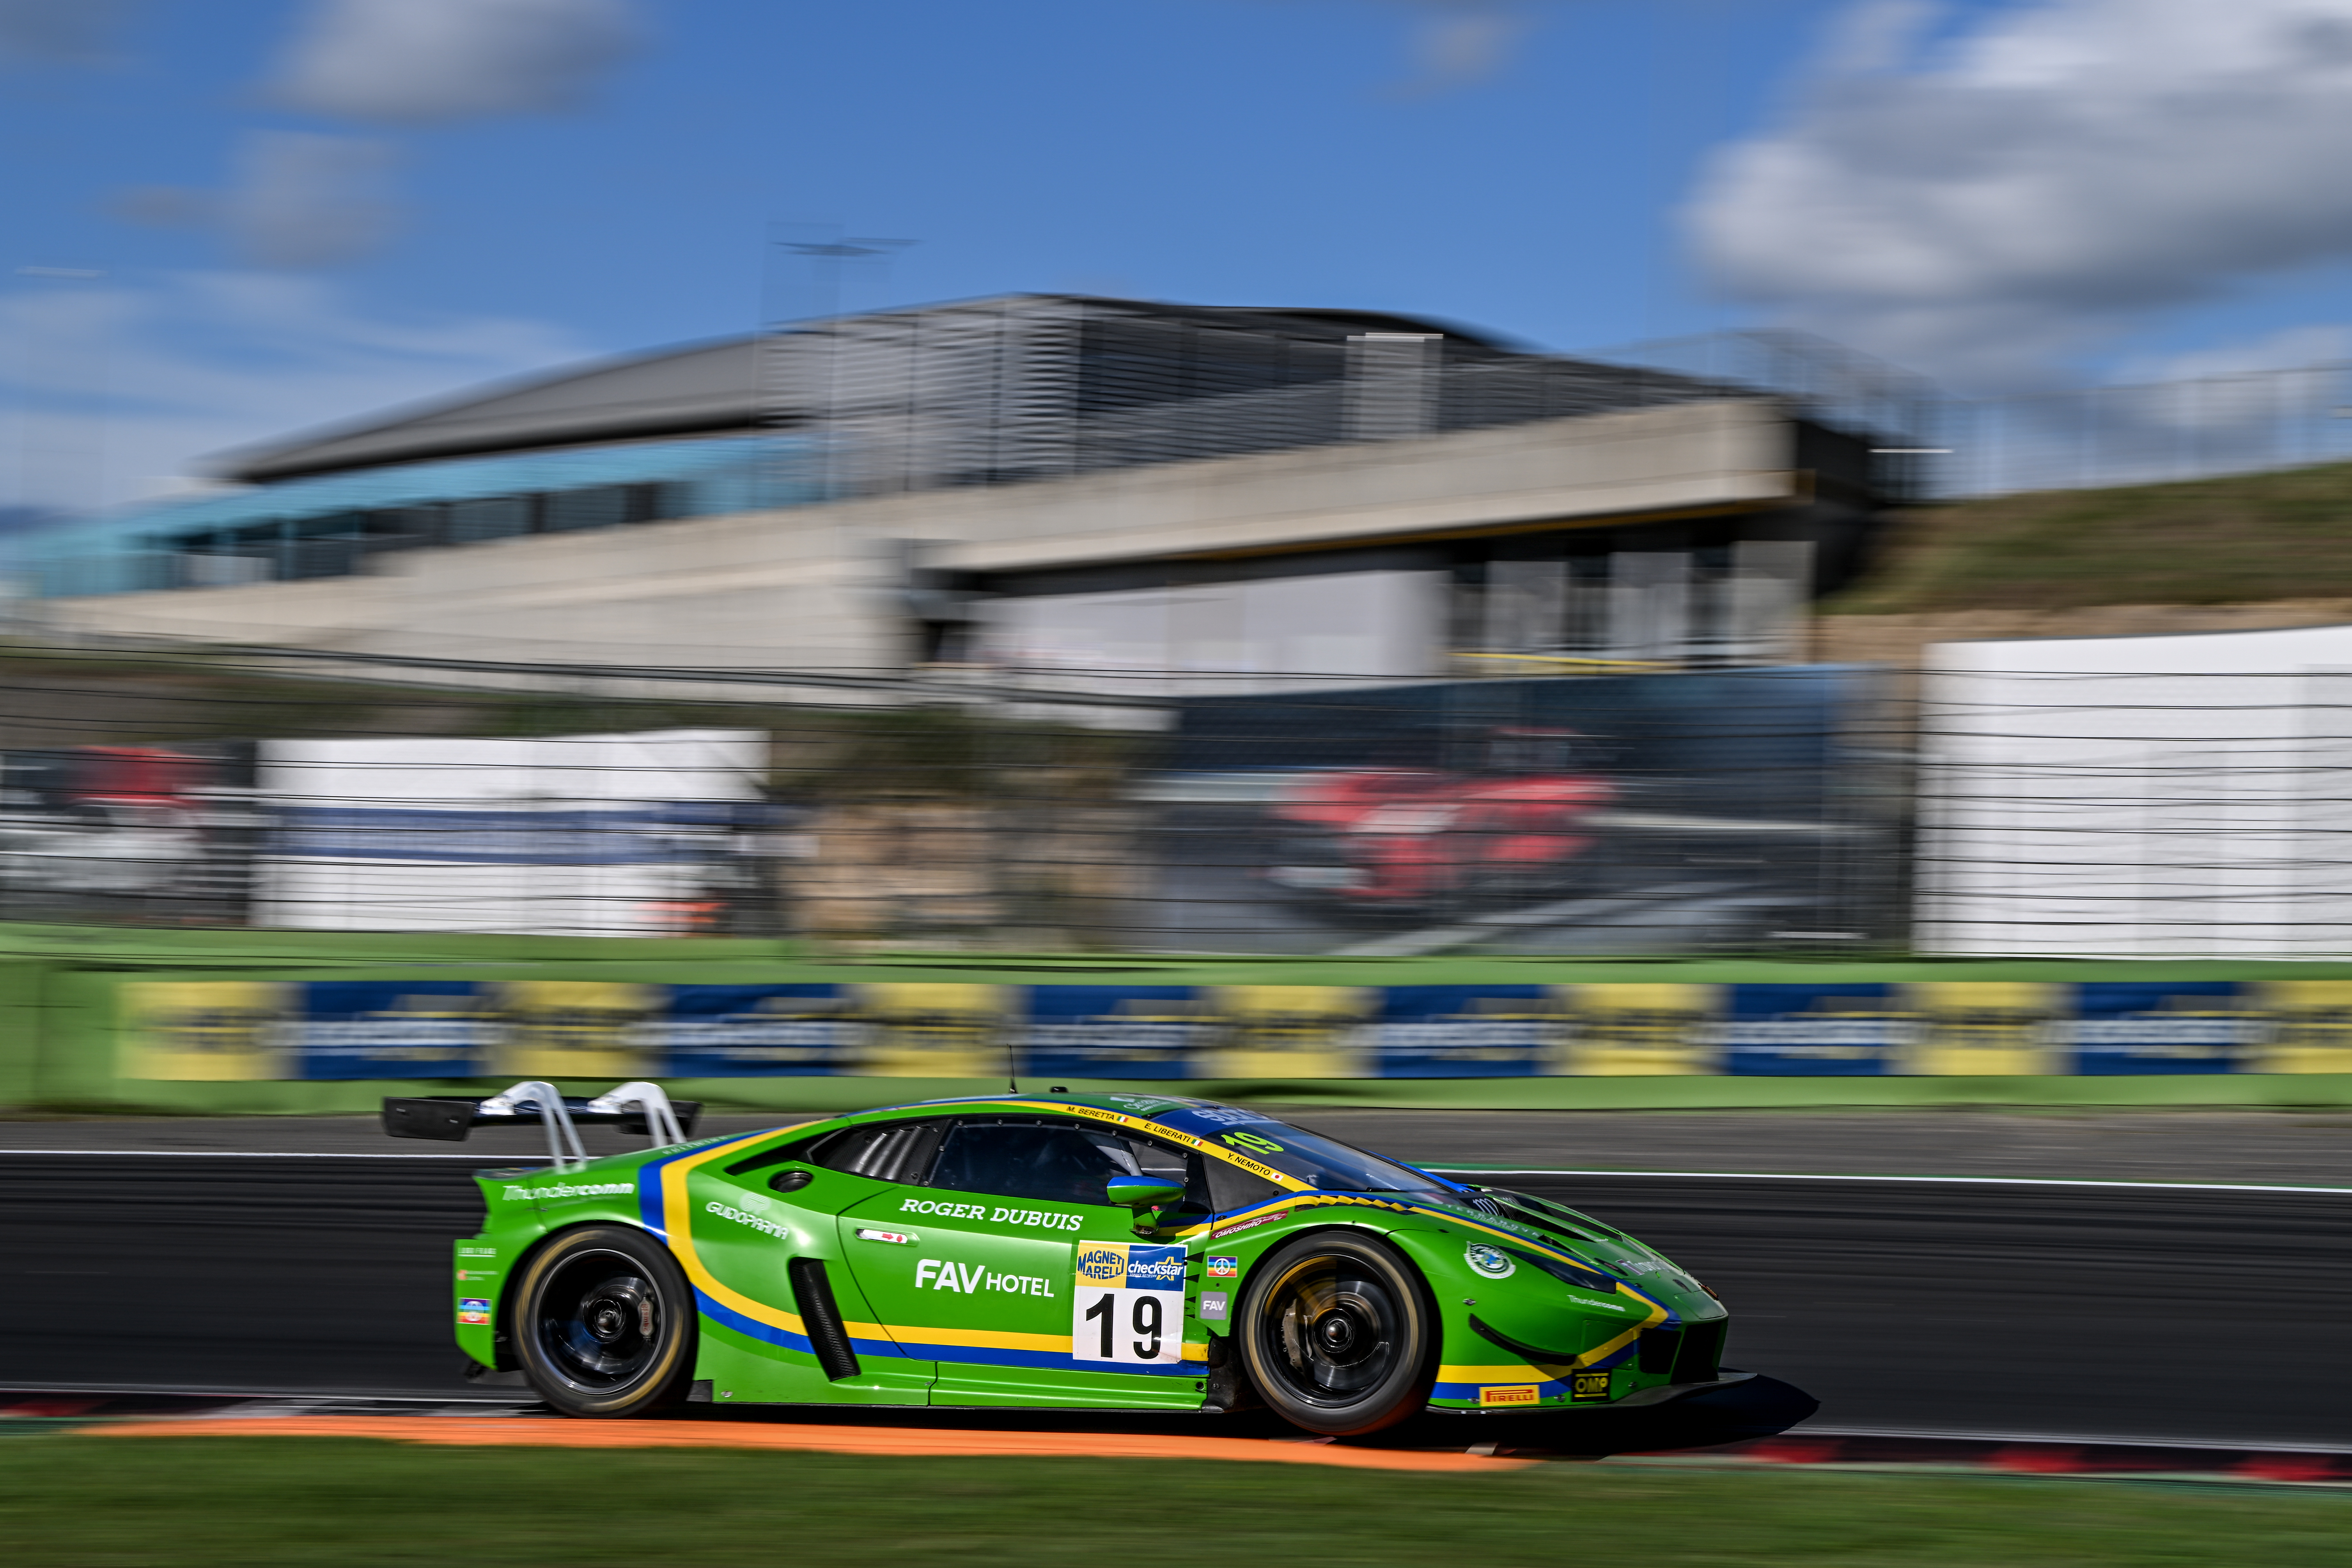 VSR LEAVES VALLELUNGA LEADING OVERALL AND PRO-AM CATEGORIES